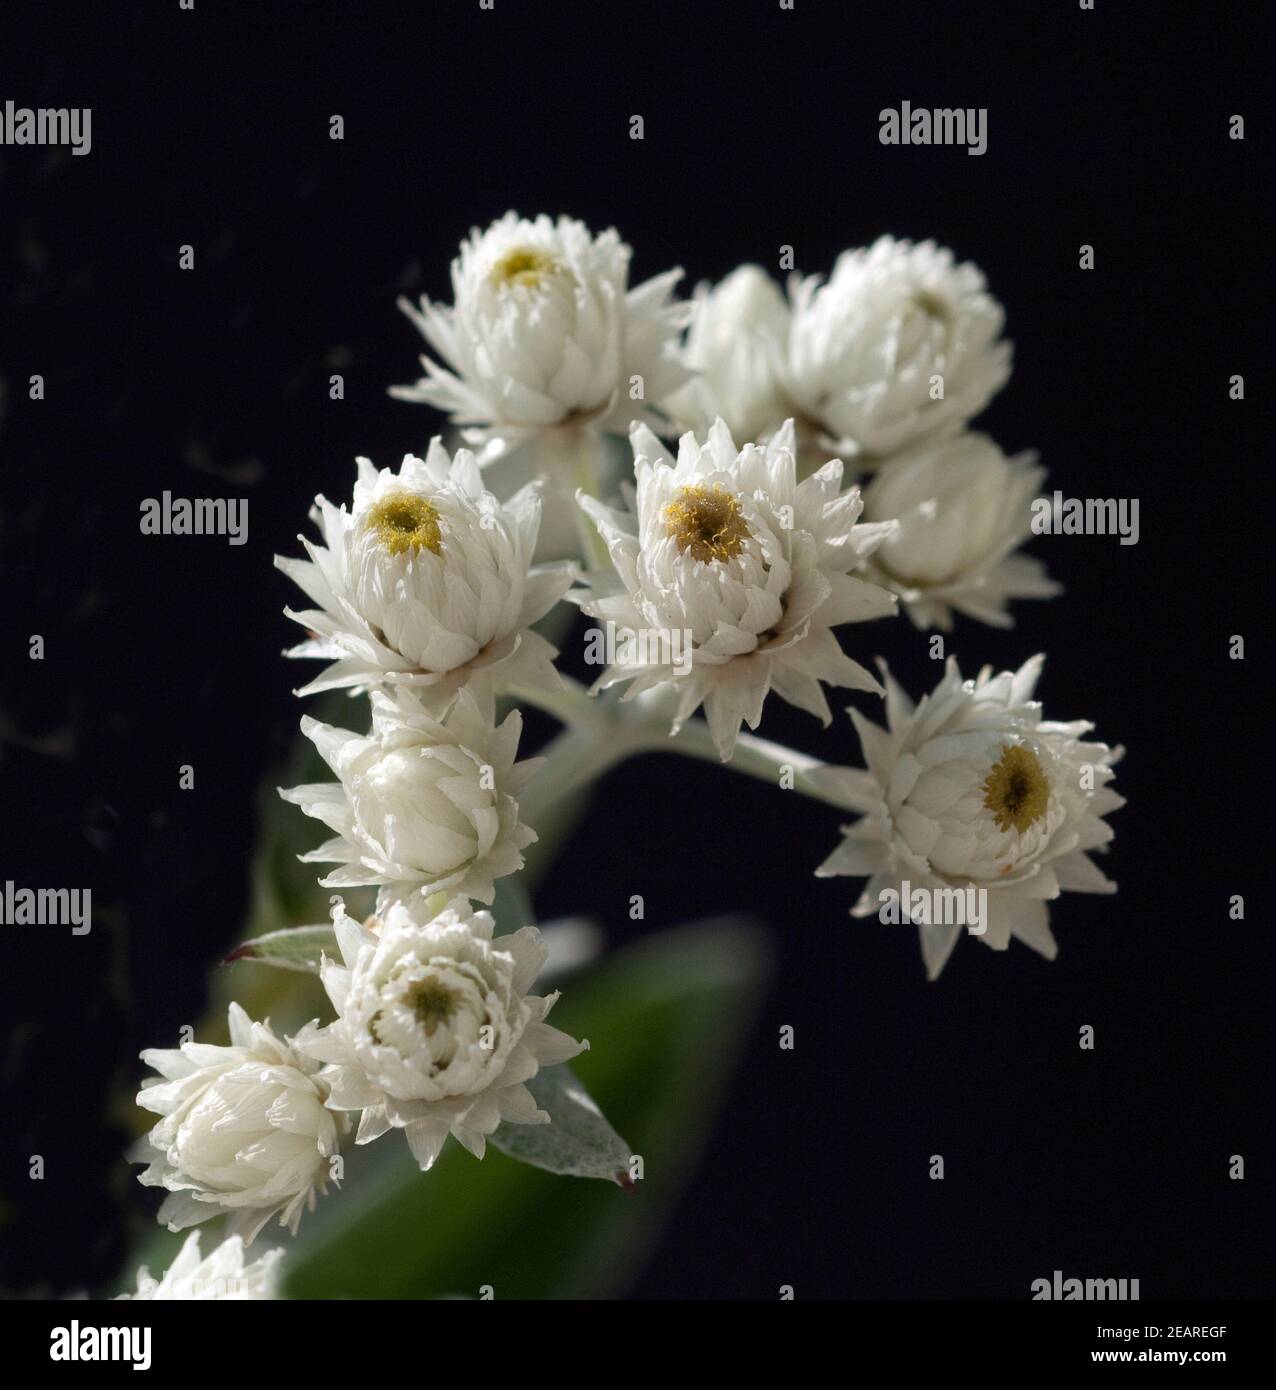 Page 14 - Blume Pflanze High Resolution Stock Photography and Images - Alamy